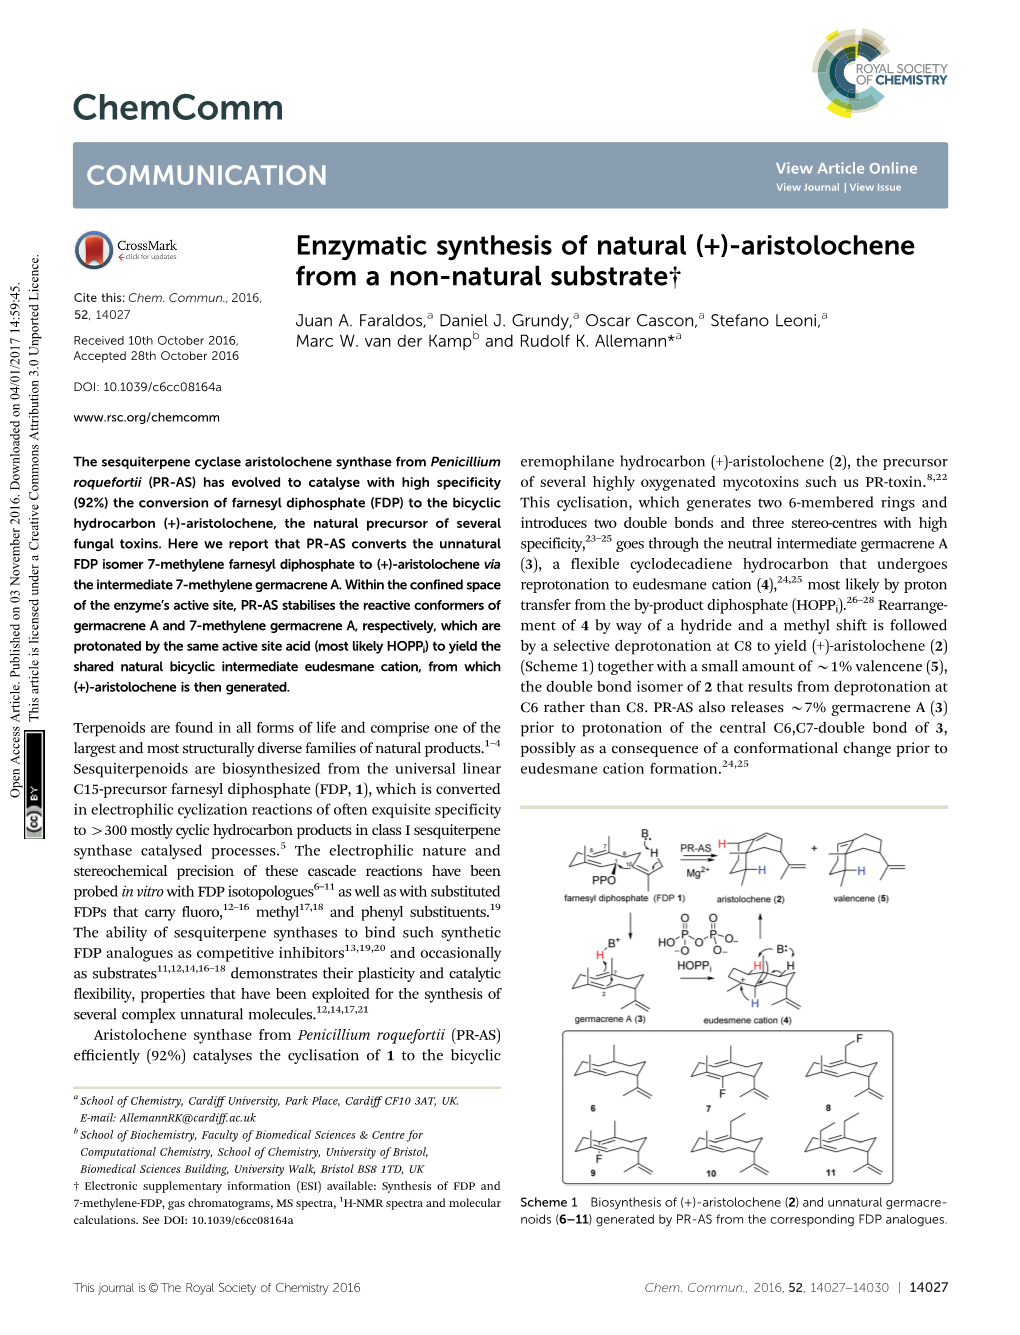 Enzymatic Synthesis of Natural (+)-Aristolochene from a Non-Natural Substrate† Cite This: Chem